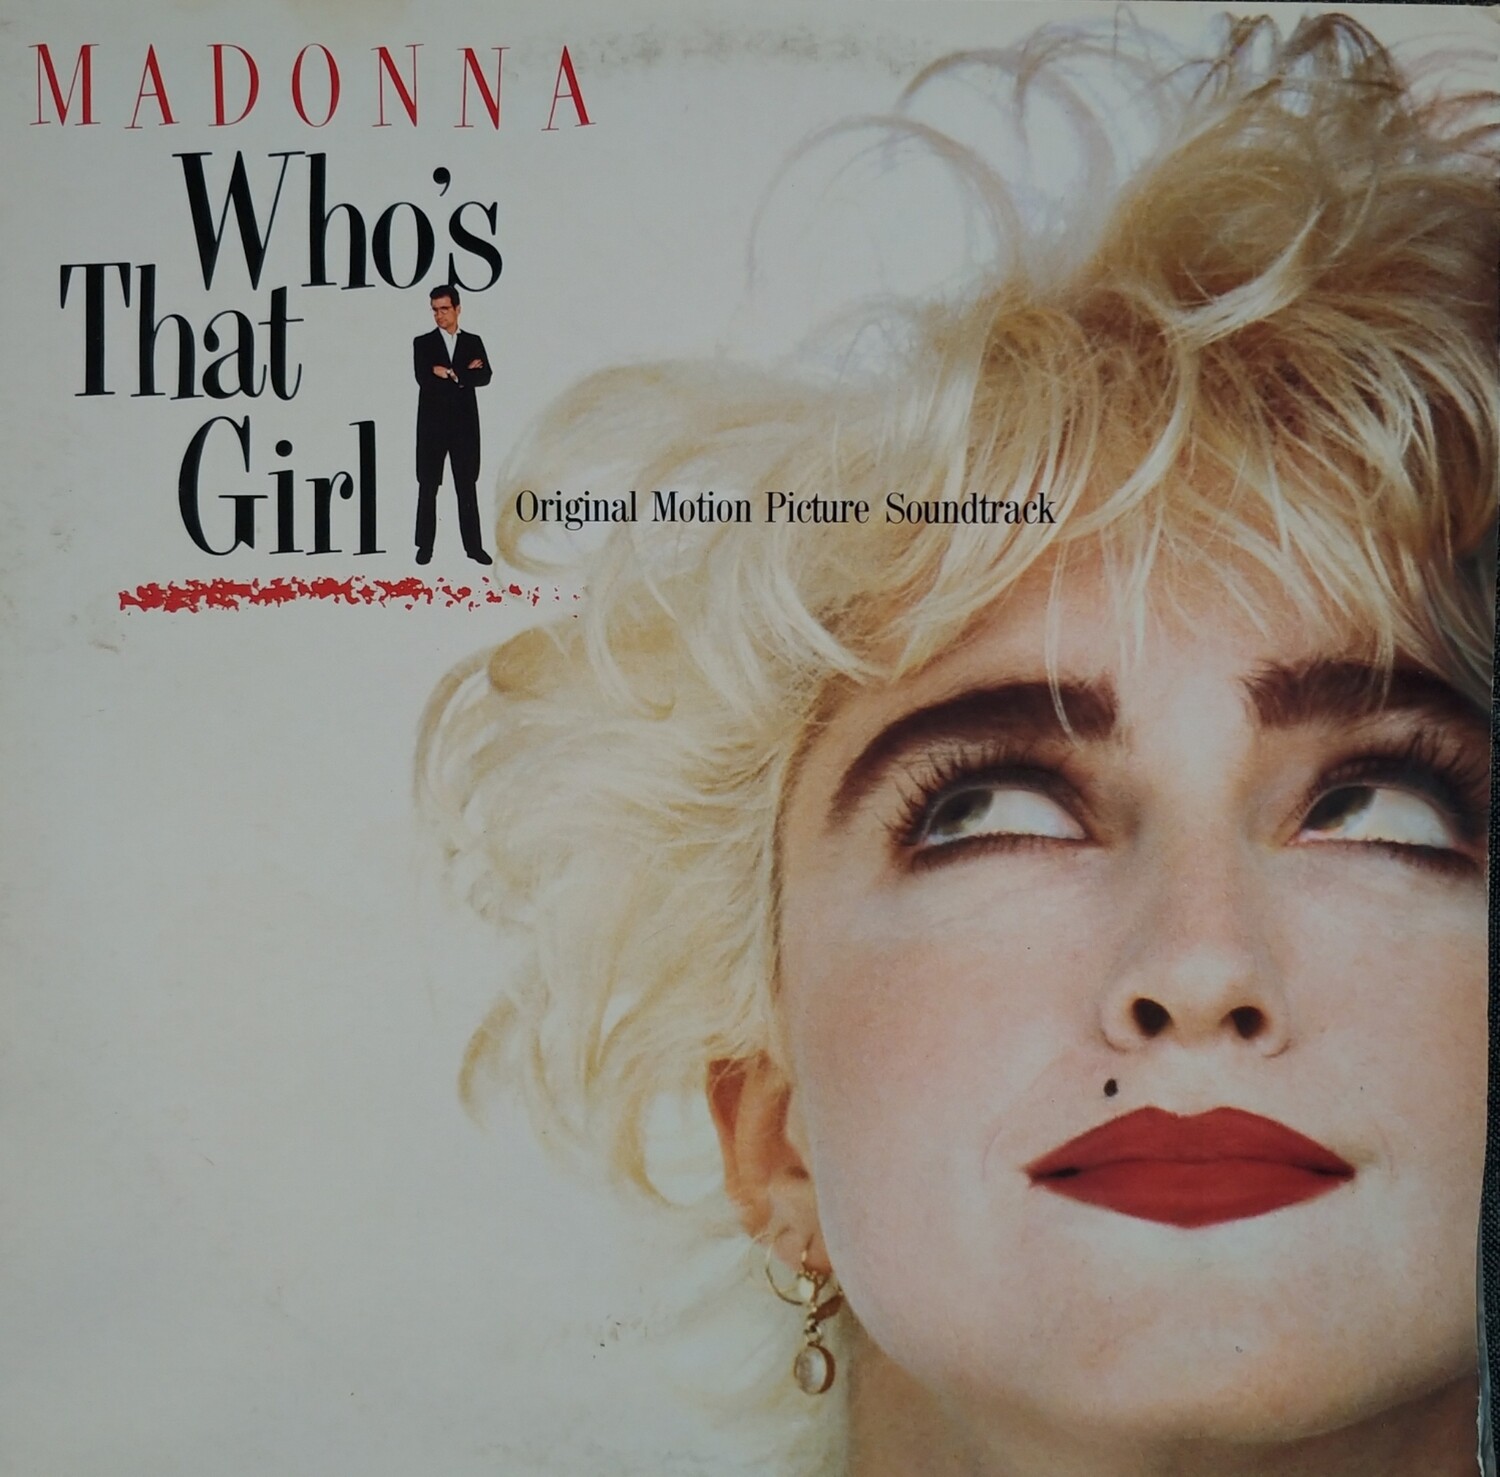 Madonna - Who's that Girl Original motion picture soundtrack